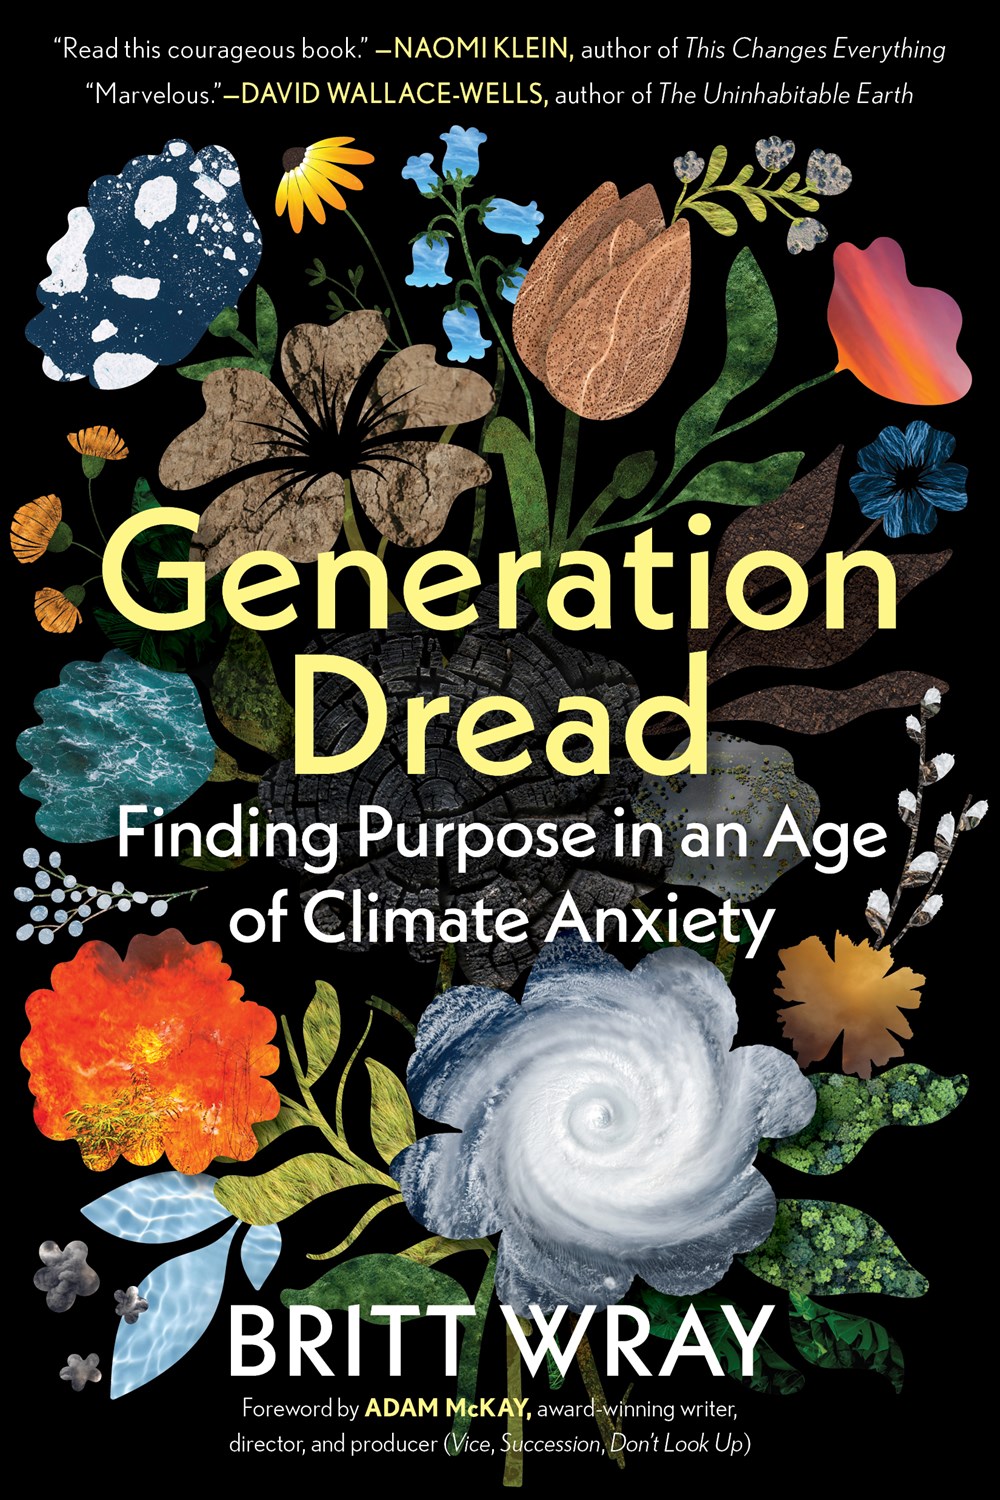 Generation Dread: Finding Purpose in an Age of Climate Anxiety